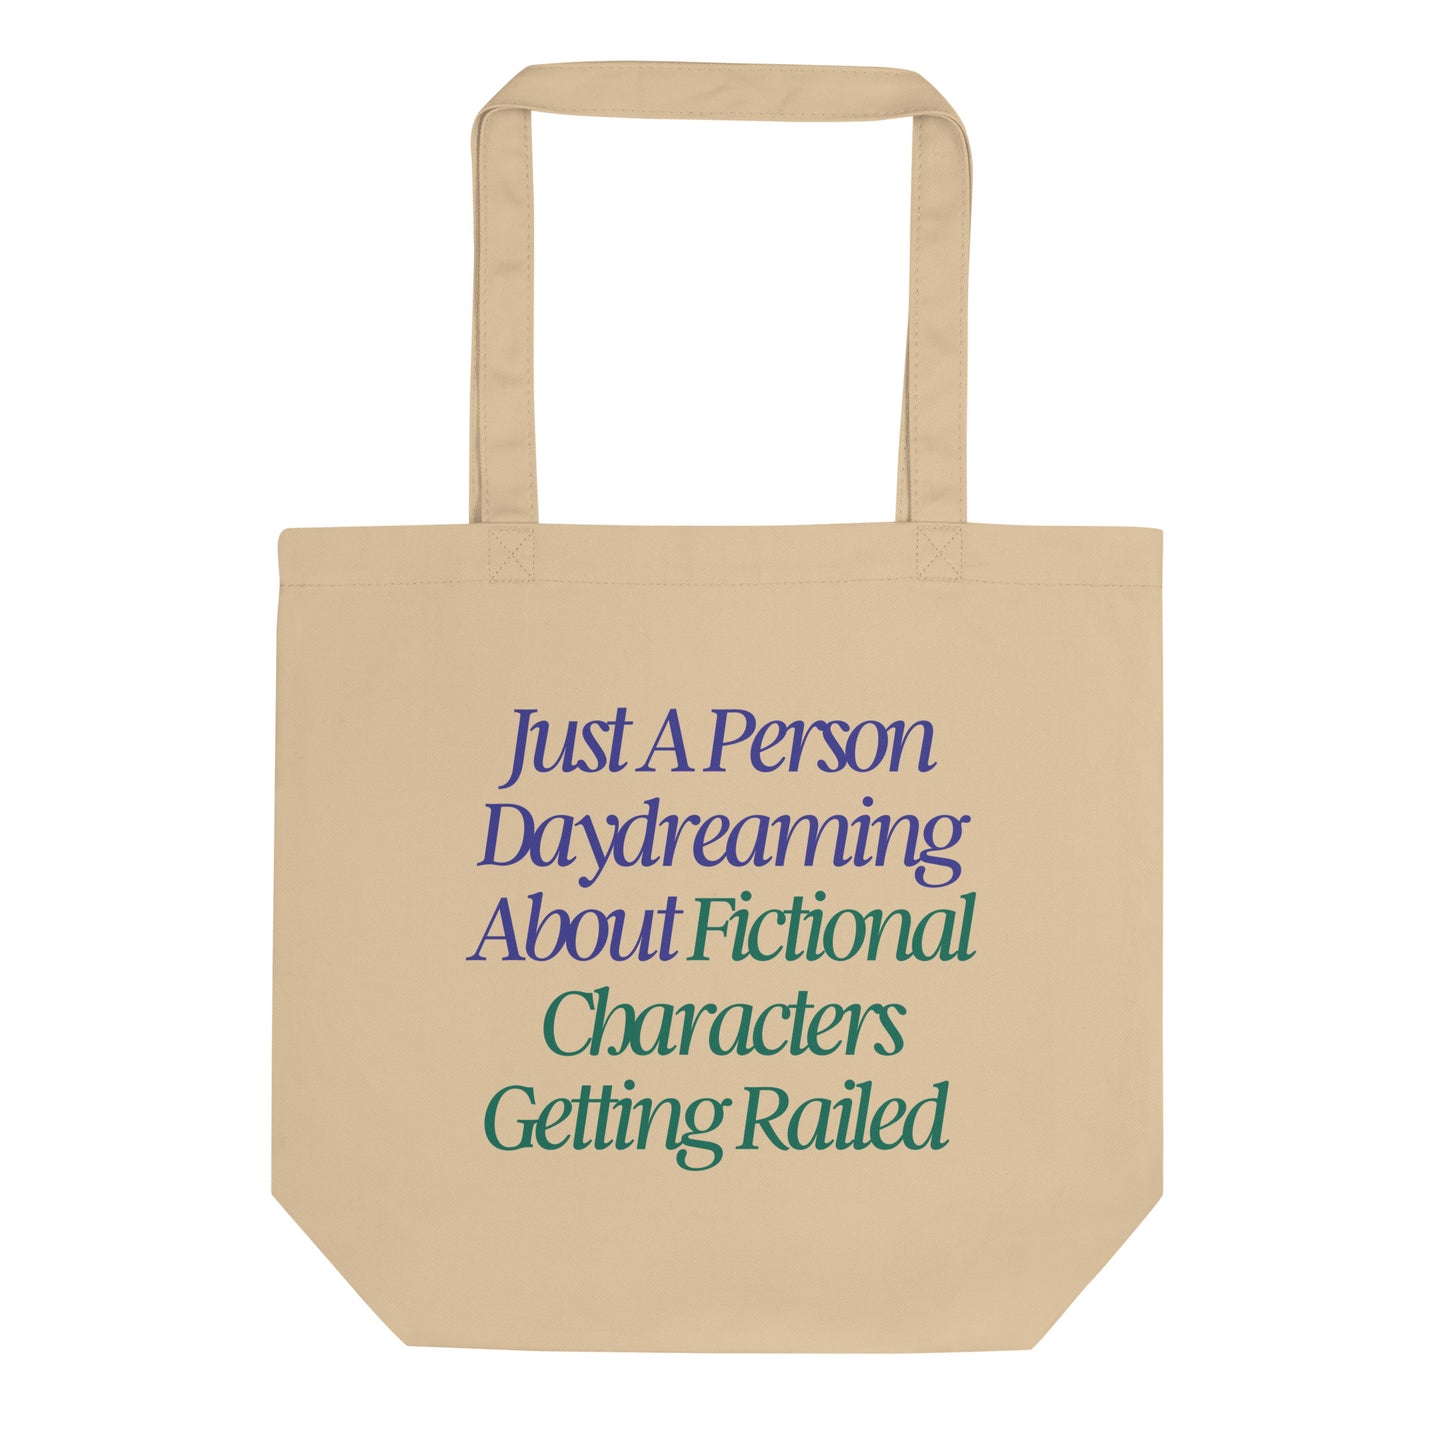 Just a Person Daydreaming About Fictional Characters Getting Railed Smutty Bookish Tote Bag